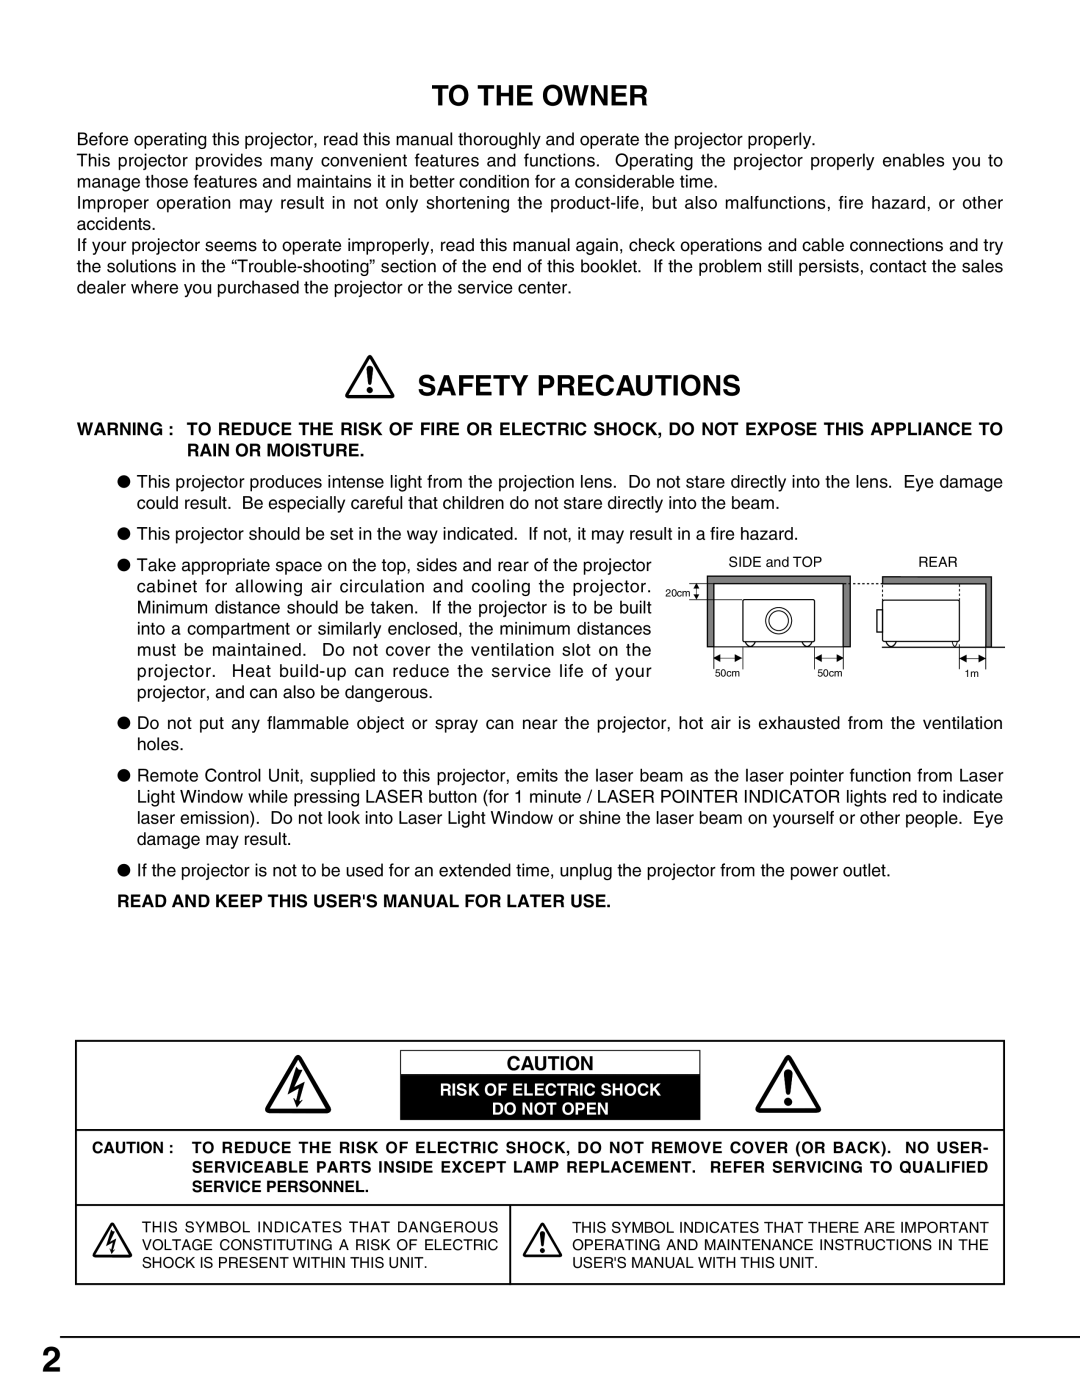 Christie Digital Systems 38-MX2001-01 To The Owner, Safety Precautions, Read And Keep This Users Manual For Later Use 